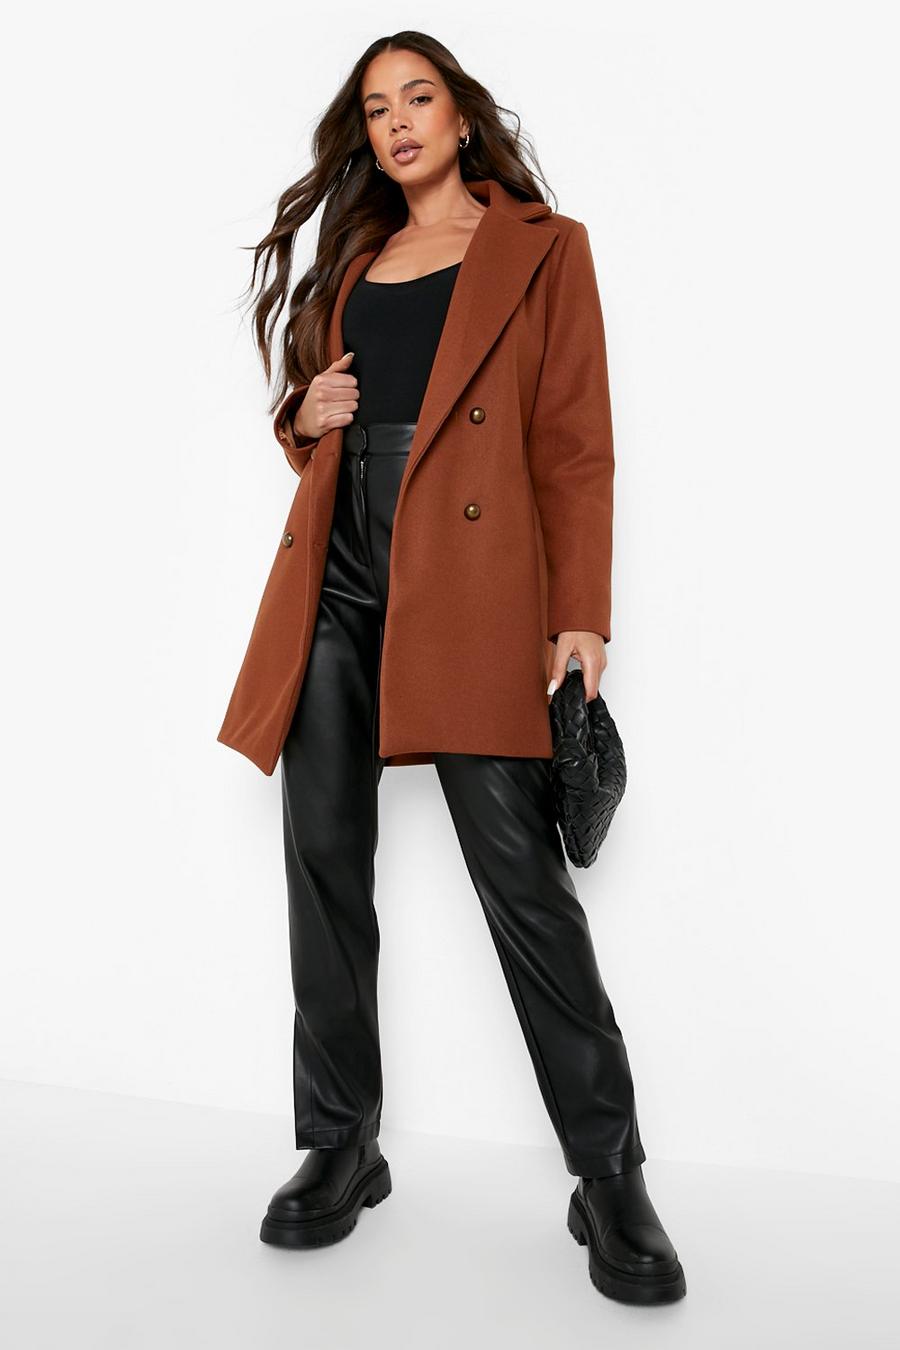 Eve in Paradise Wool Coat brown classic style Fashion Coats Wool Coats 